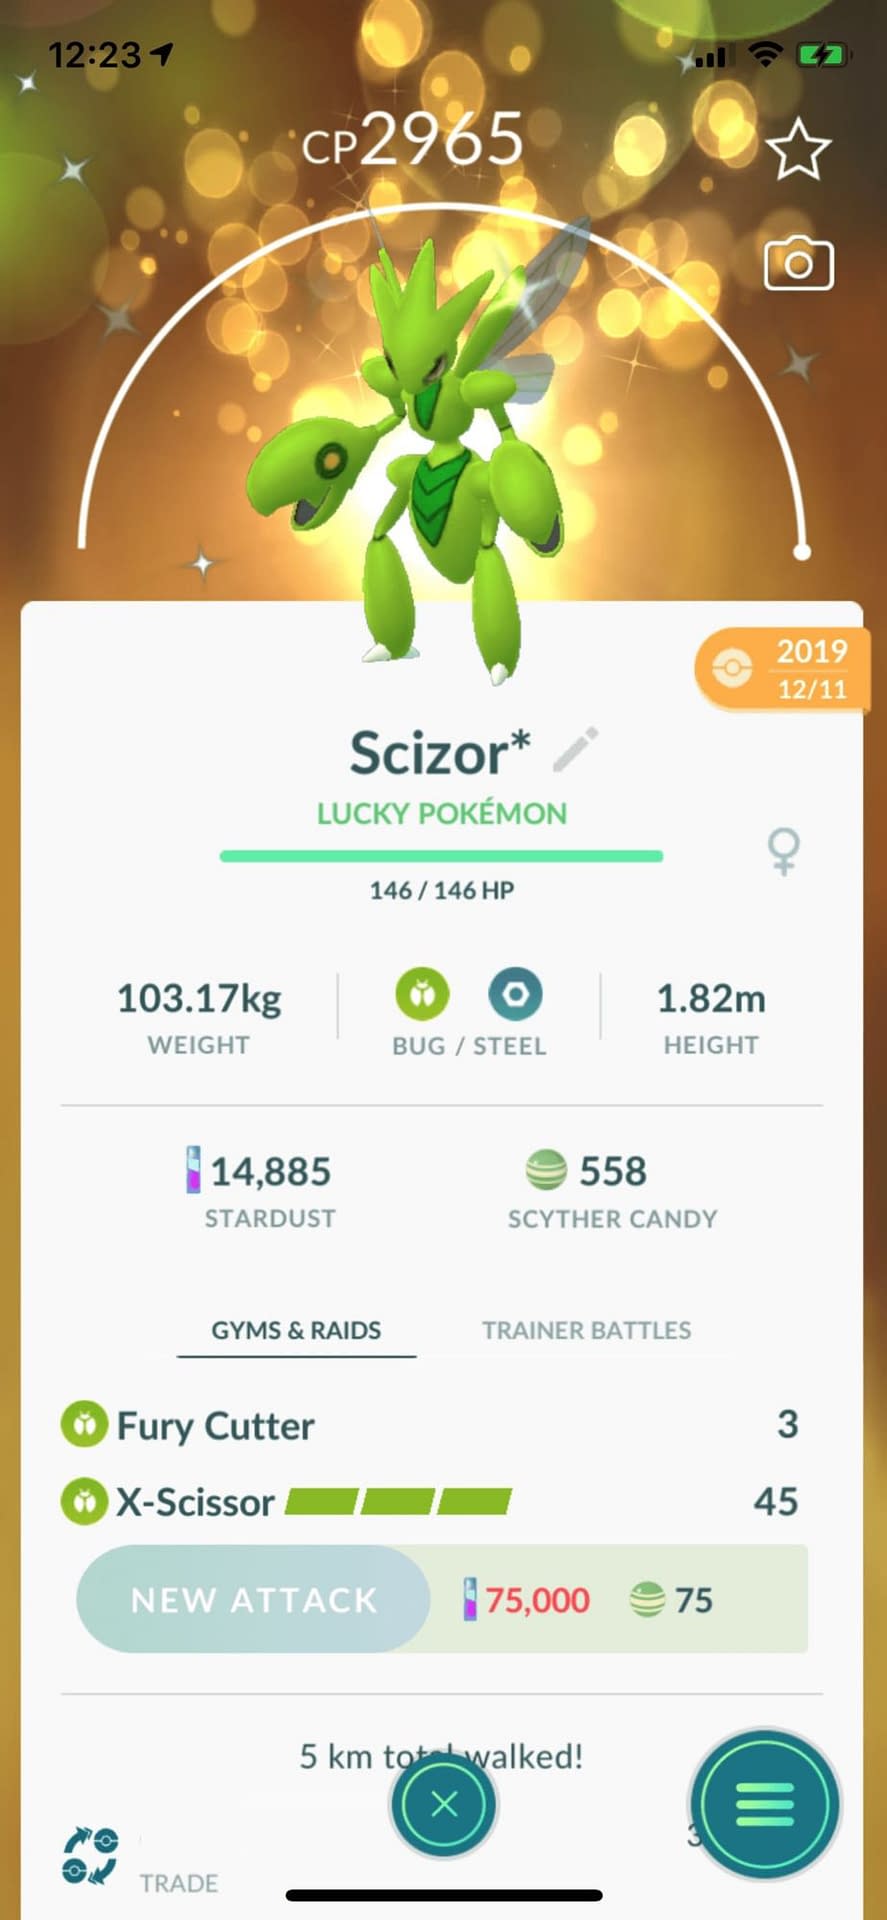 How To Get A Lucky Pokémon In Pokémon GO A Trading Guide